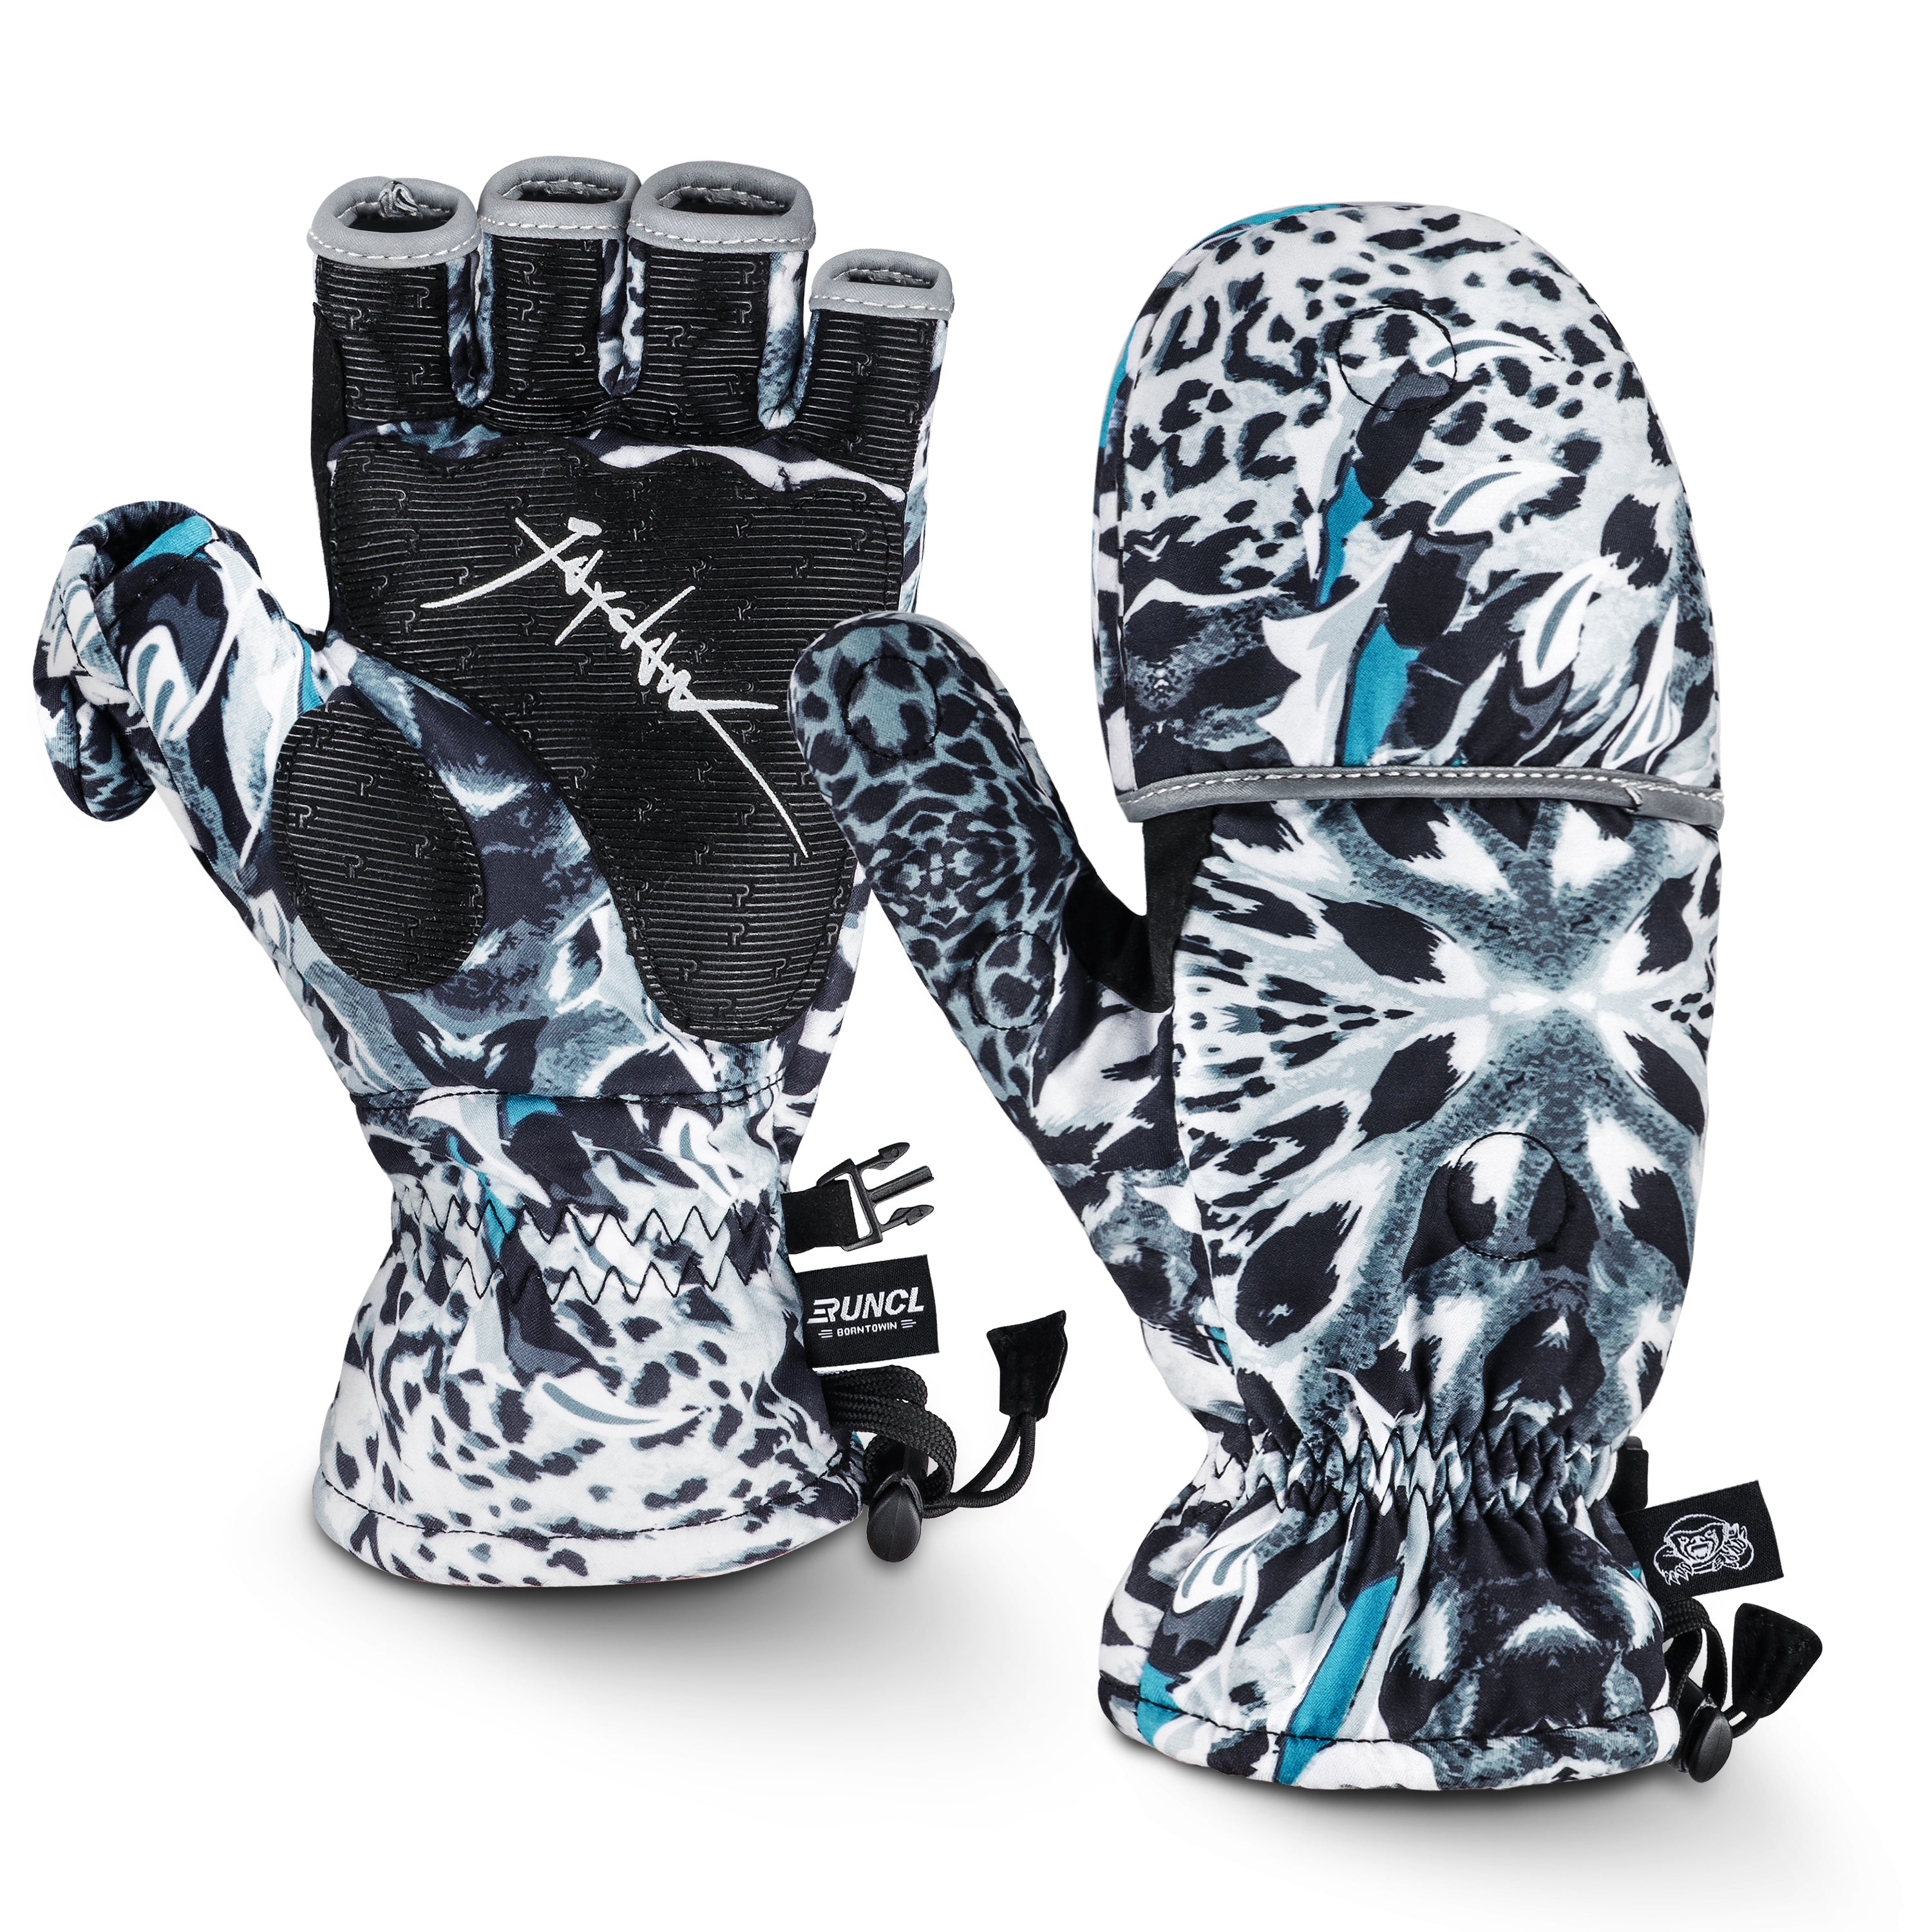 Ice Fishing Gloves - For Cold Weather - JAYCLAW – Runcl